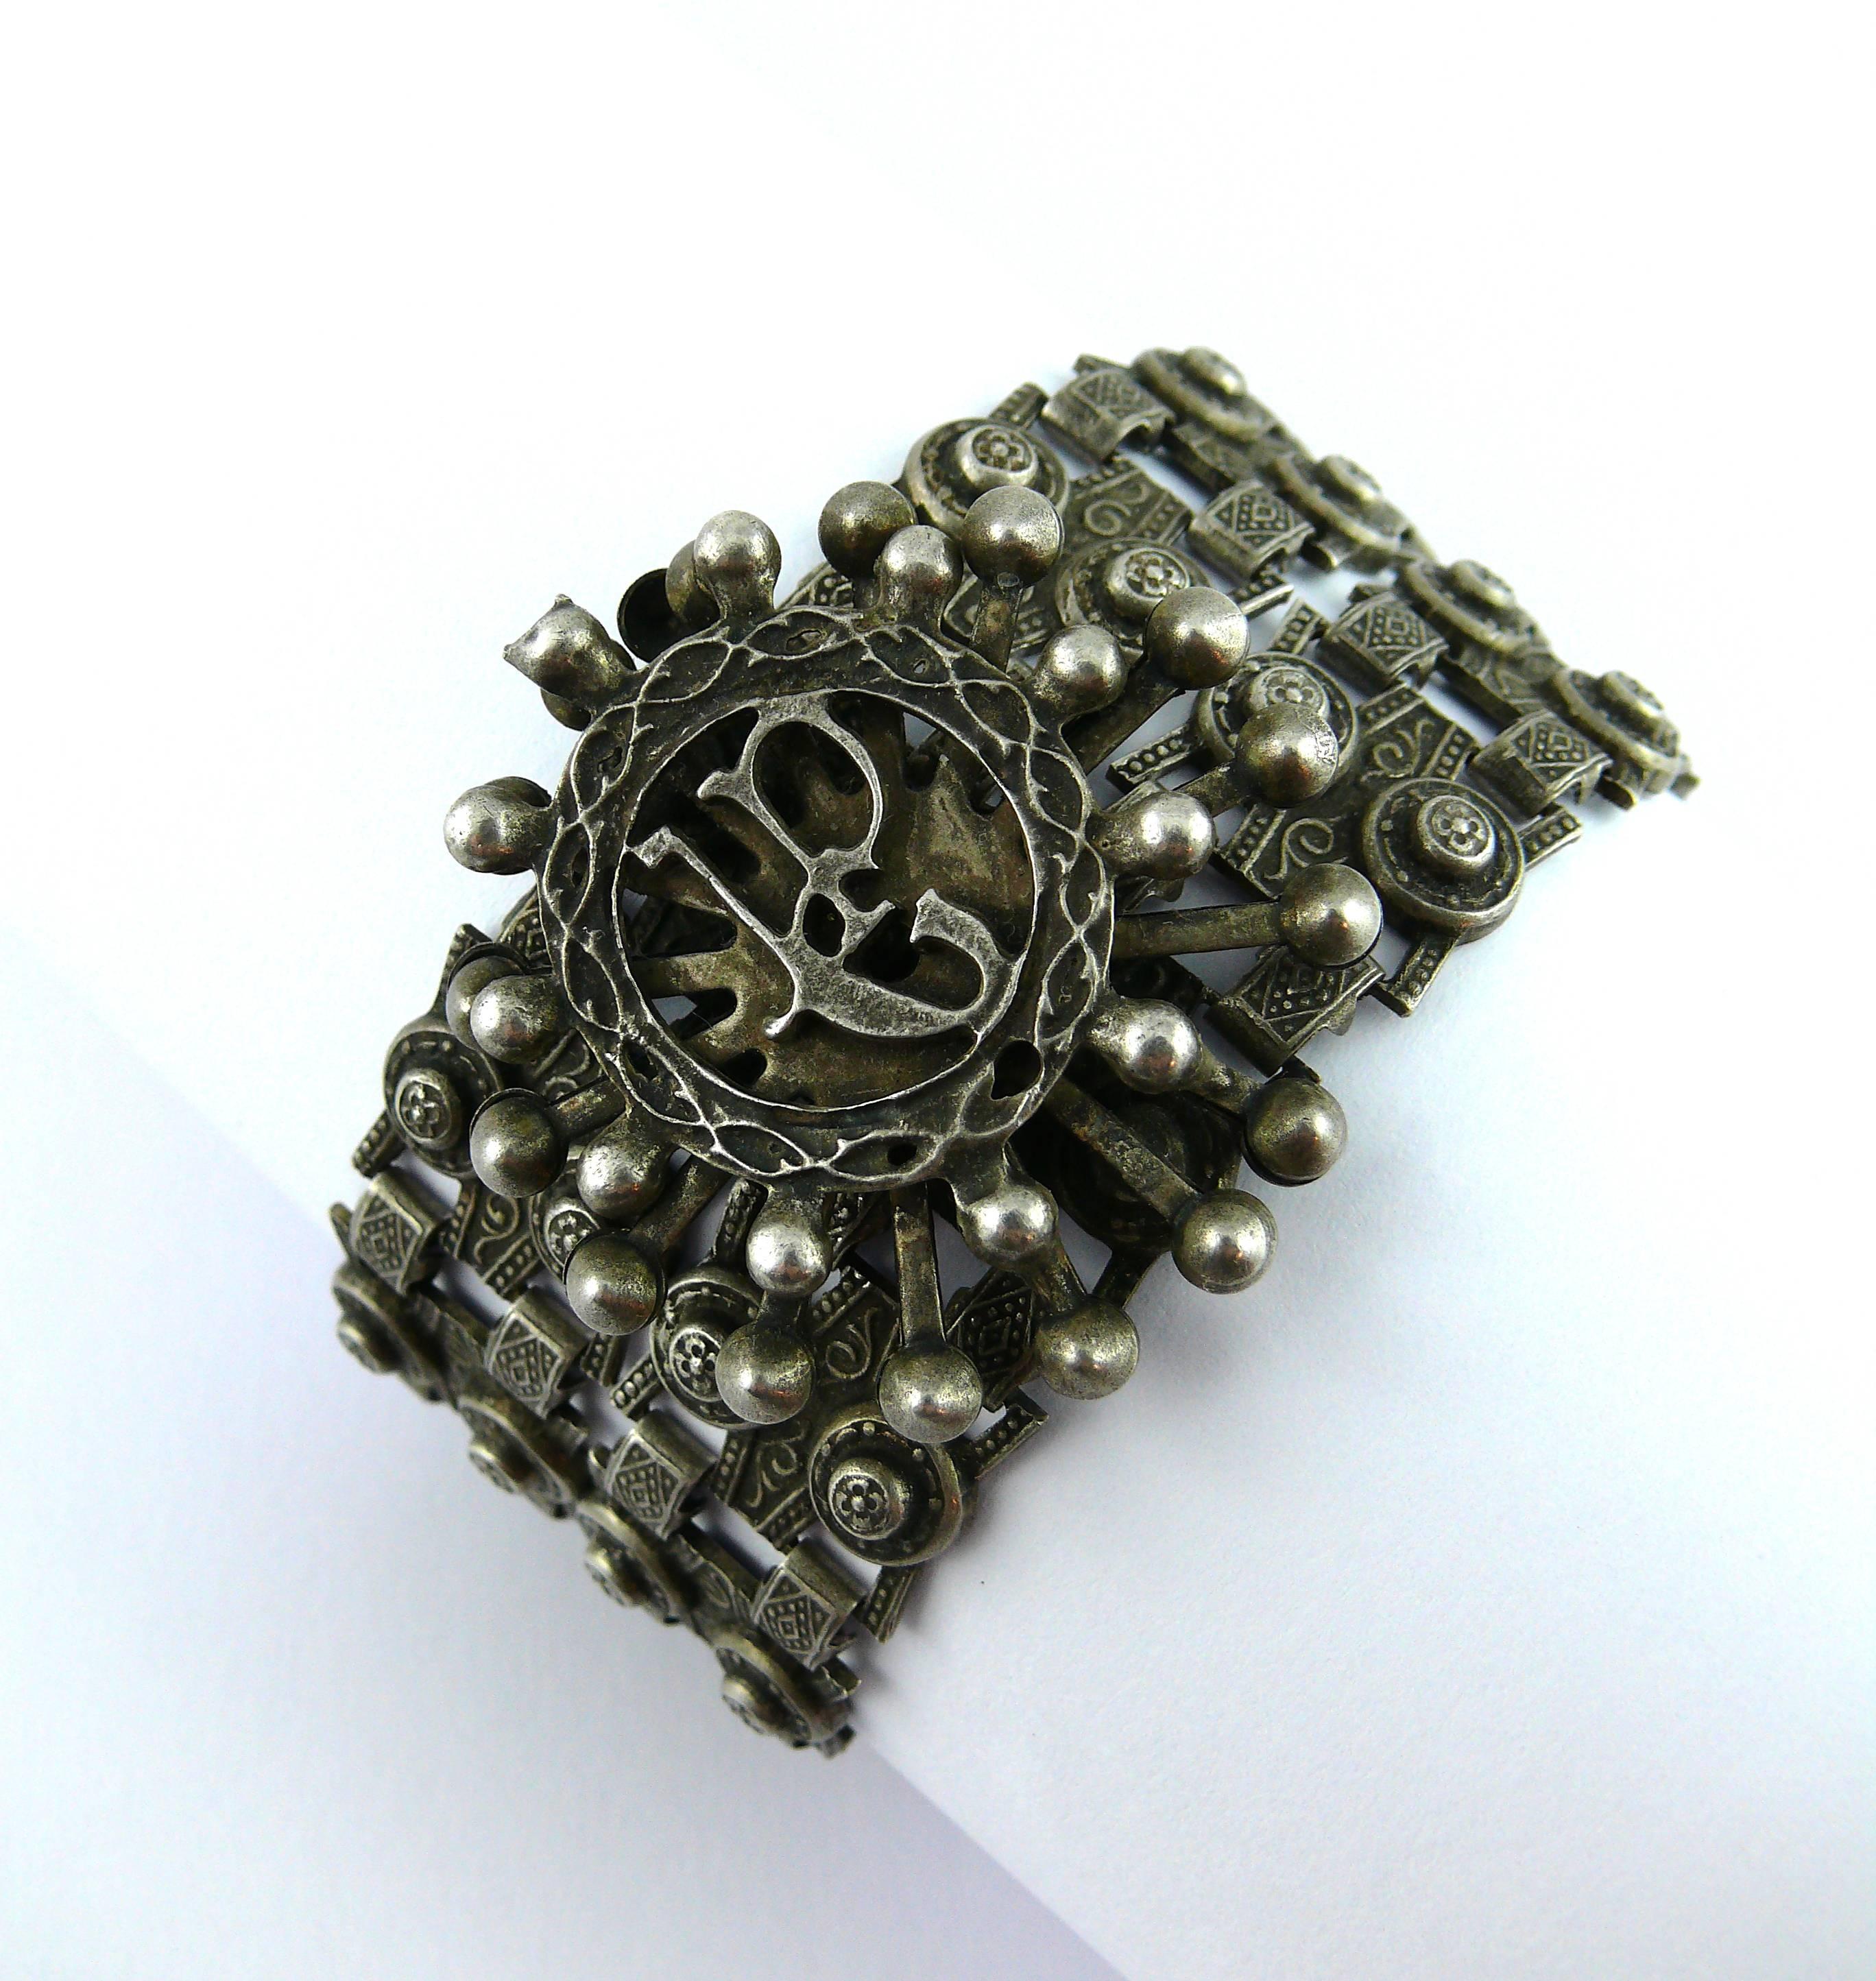 JEAN PAUL GAULTIER vintage 1990s articulated bracelet.

Silver toned with antique patina oriental style links featuring a central radiant sun with JPG monogram.

JEWELRY CONDITION CHART
- New or never worn : item is in pristine condition with no